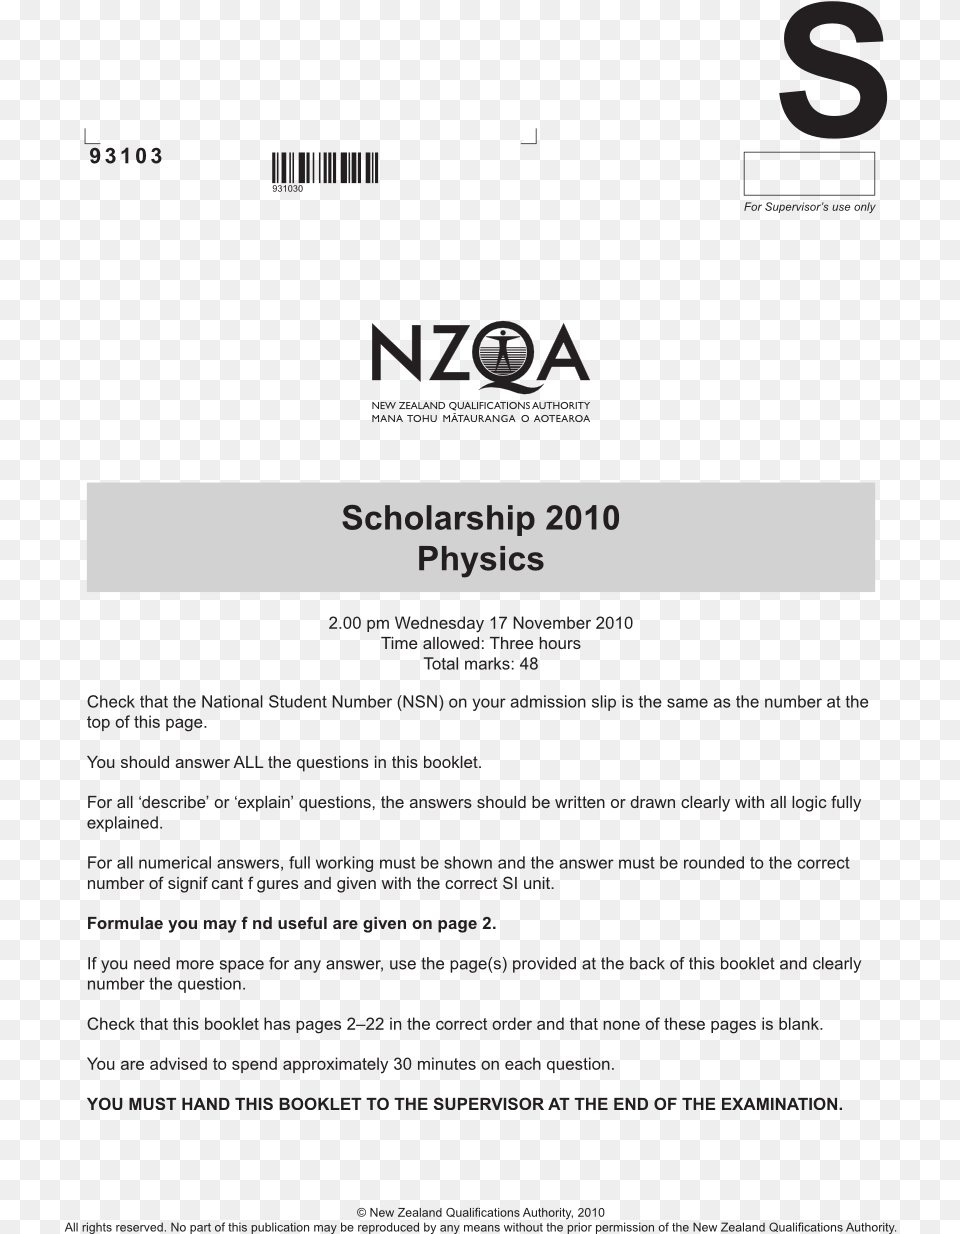 2010 Scholarship Physics, Advertisement, Poster, Page, Text Png Image